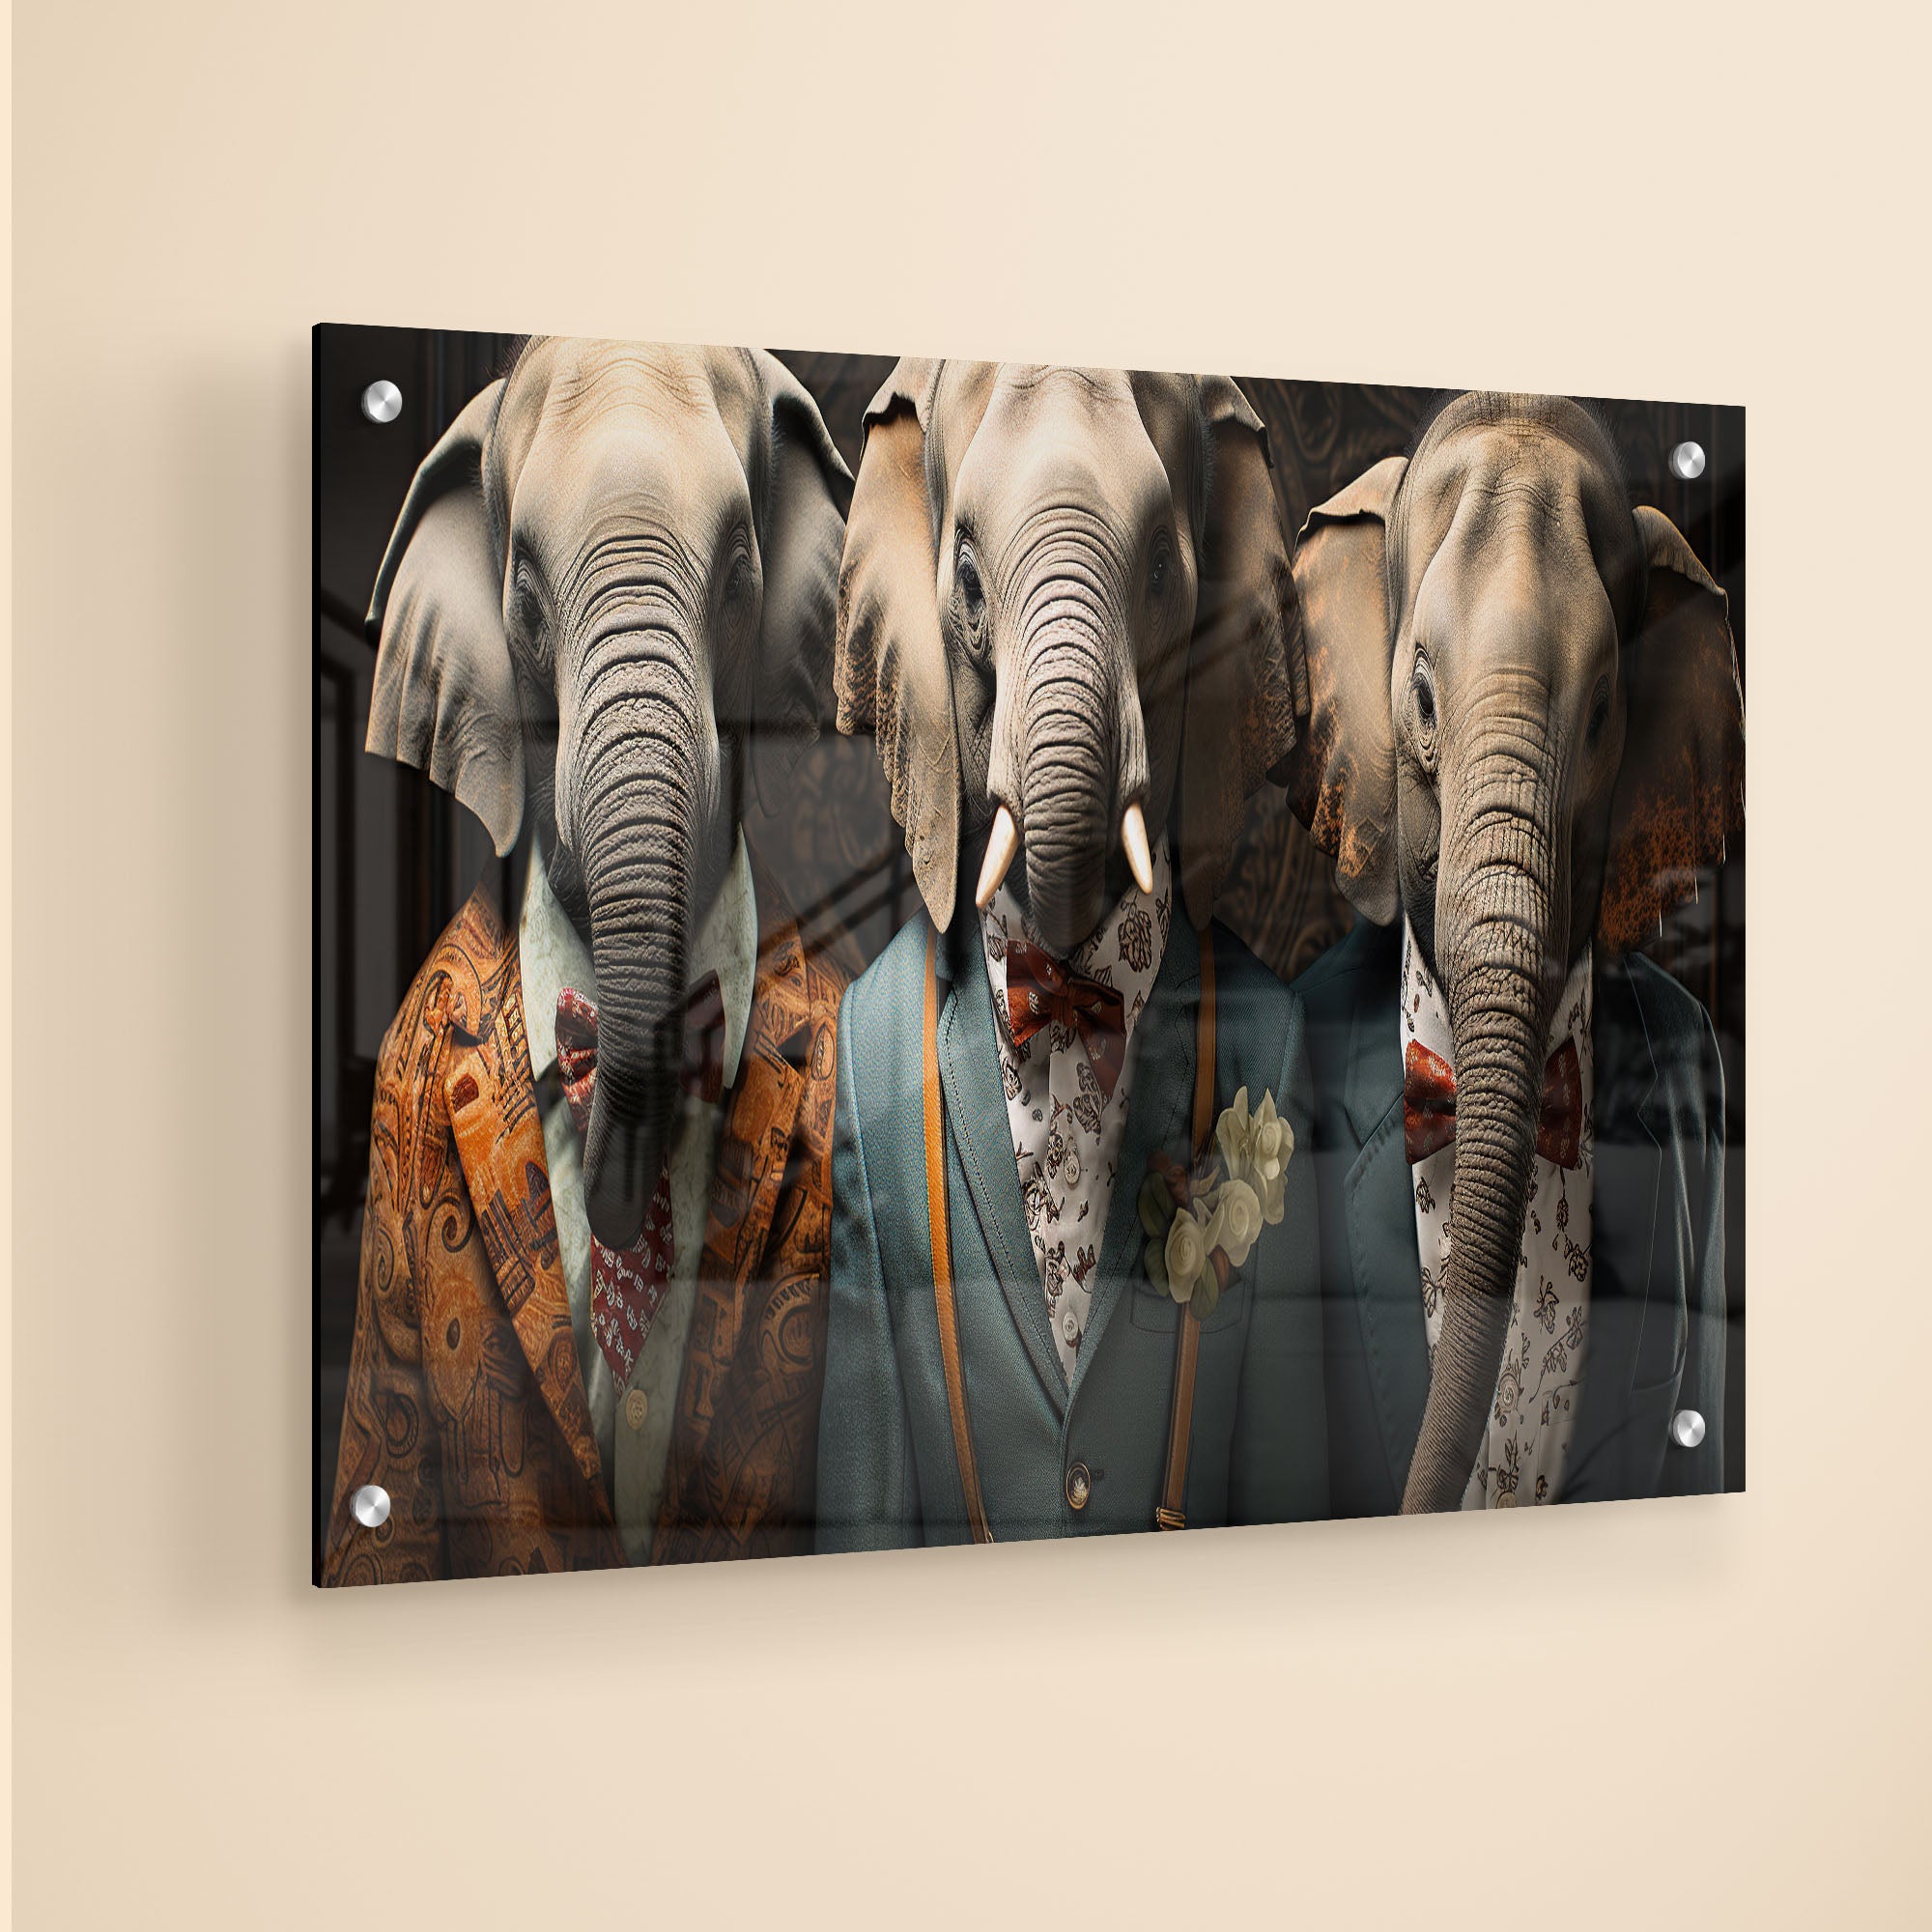 Three Elephants In Suit Acrylic Wall Painting